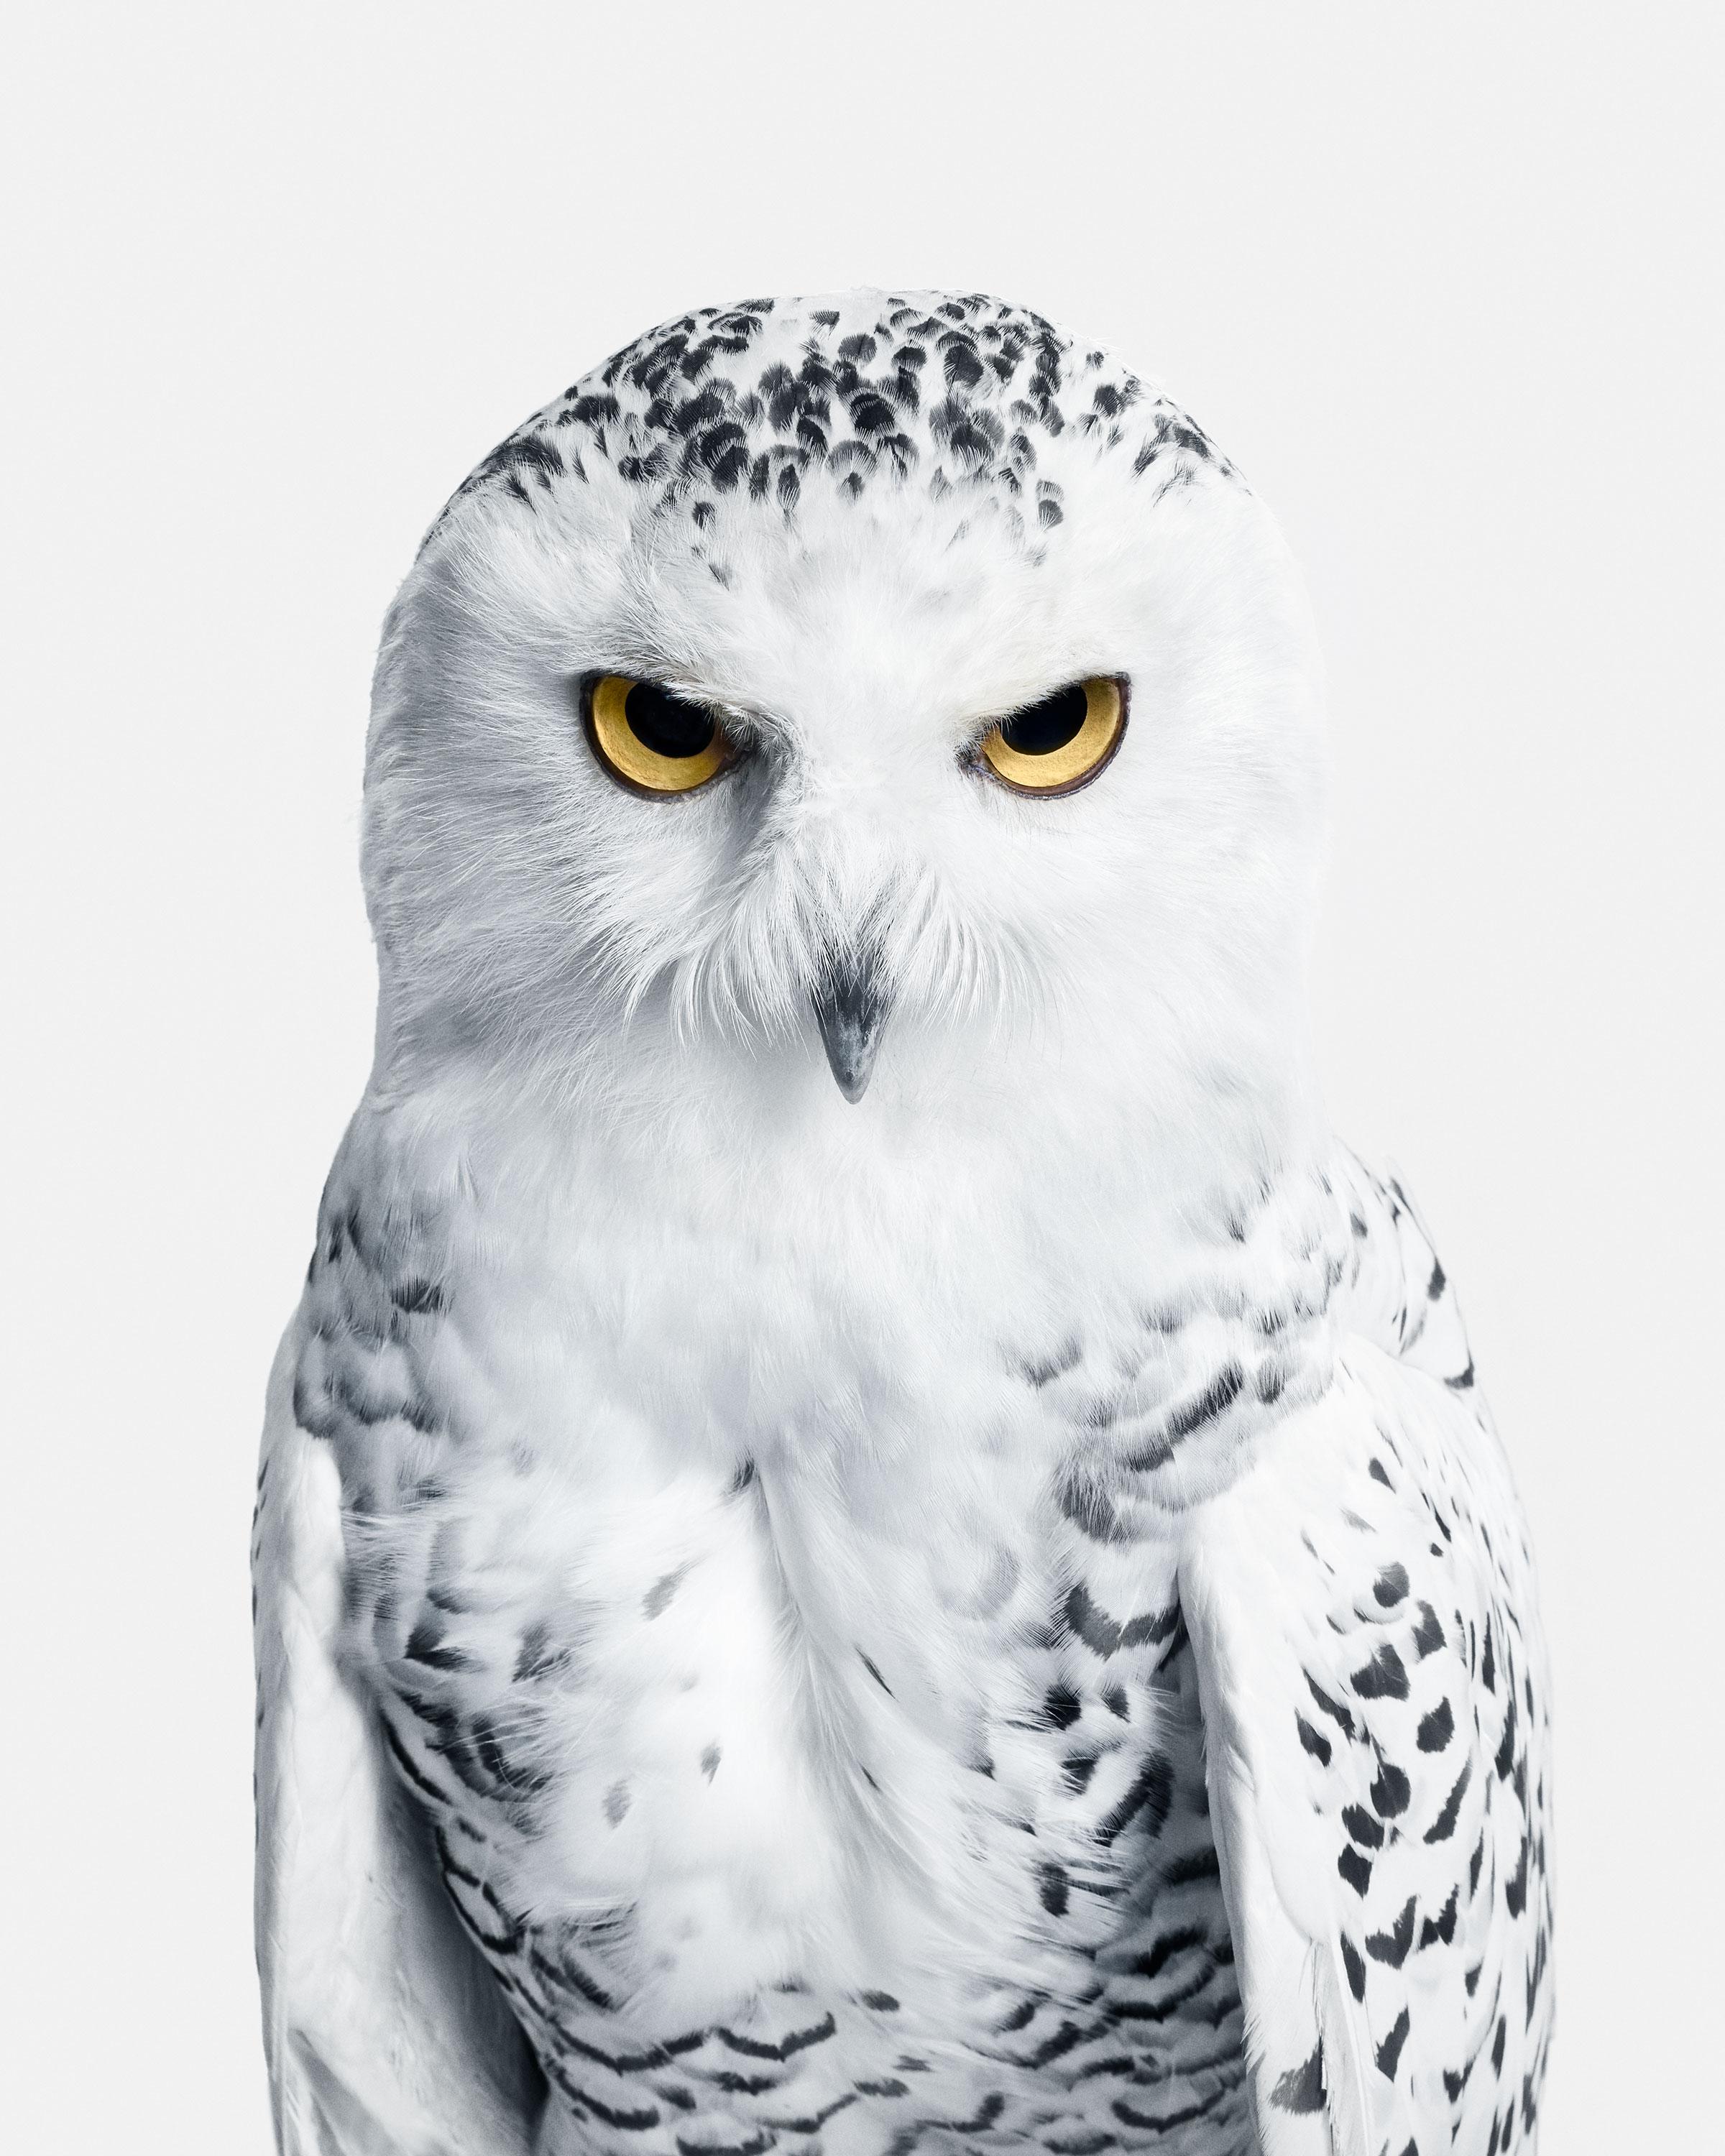 Randal Ford - Snowy Owl No. 3, Photography 2018, Printed After